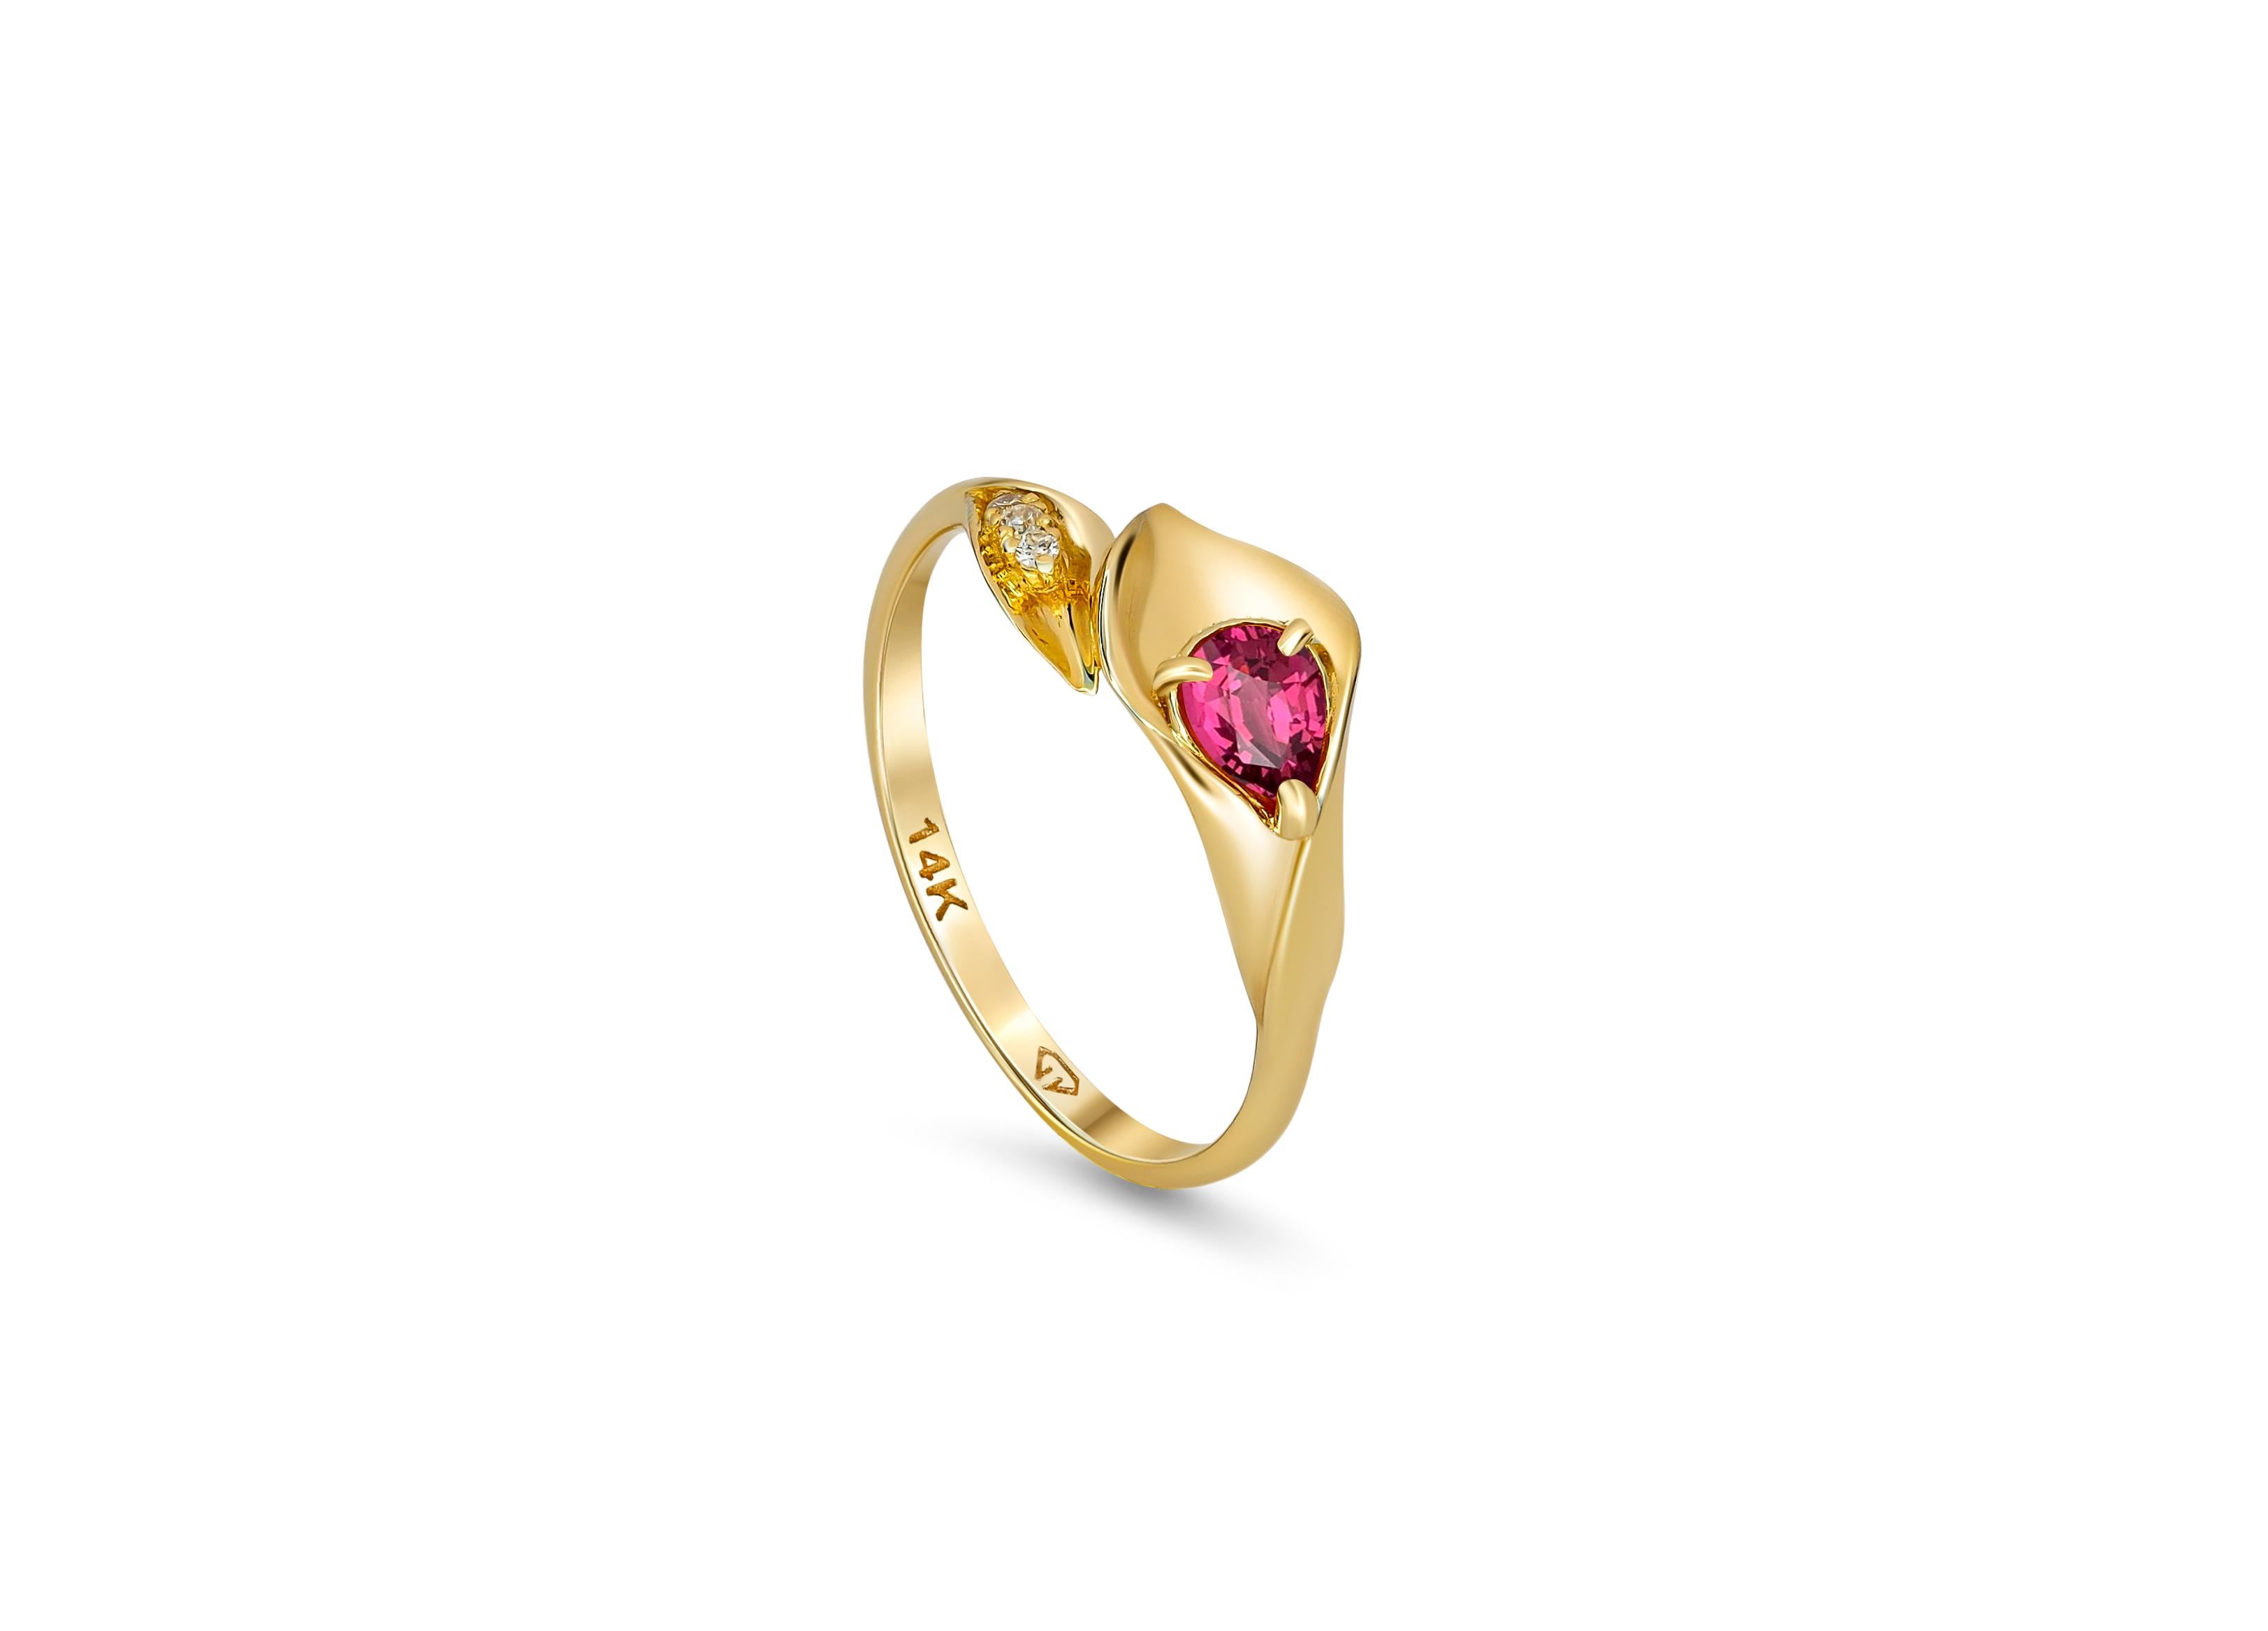 For Sale:  Lily Calla Gold Ring, 14 Karat Gold Ring with Garnet and Diamonds 5